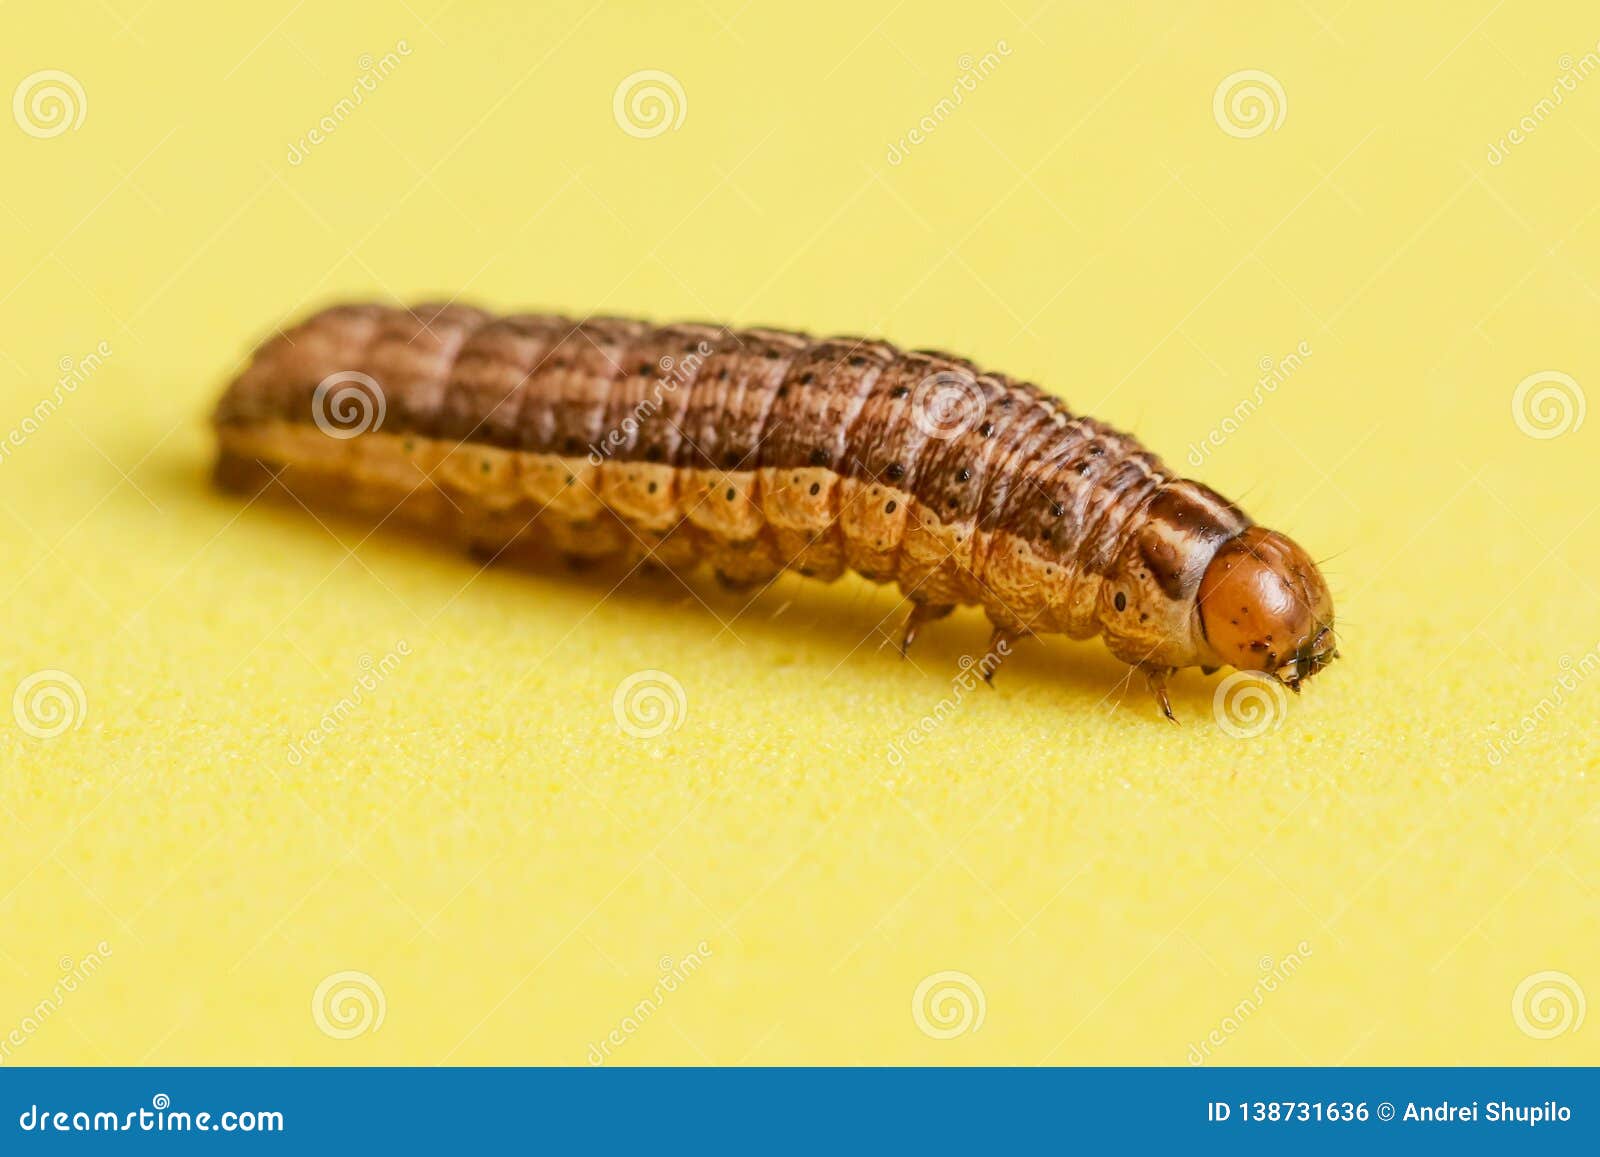 The Caterpillar Crawls on a Yellow Background Stock Photo - Image of  insect, striped: 138731636